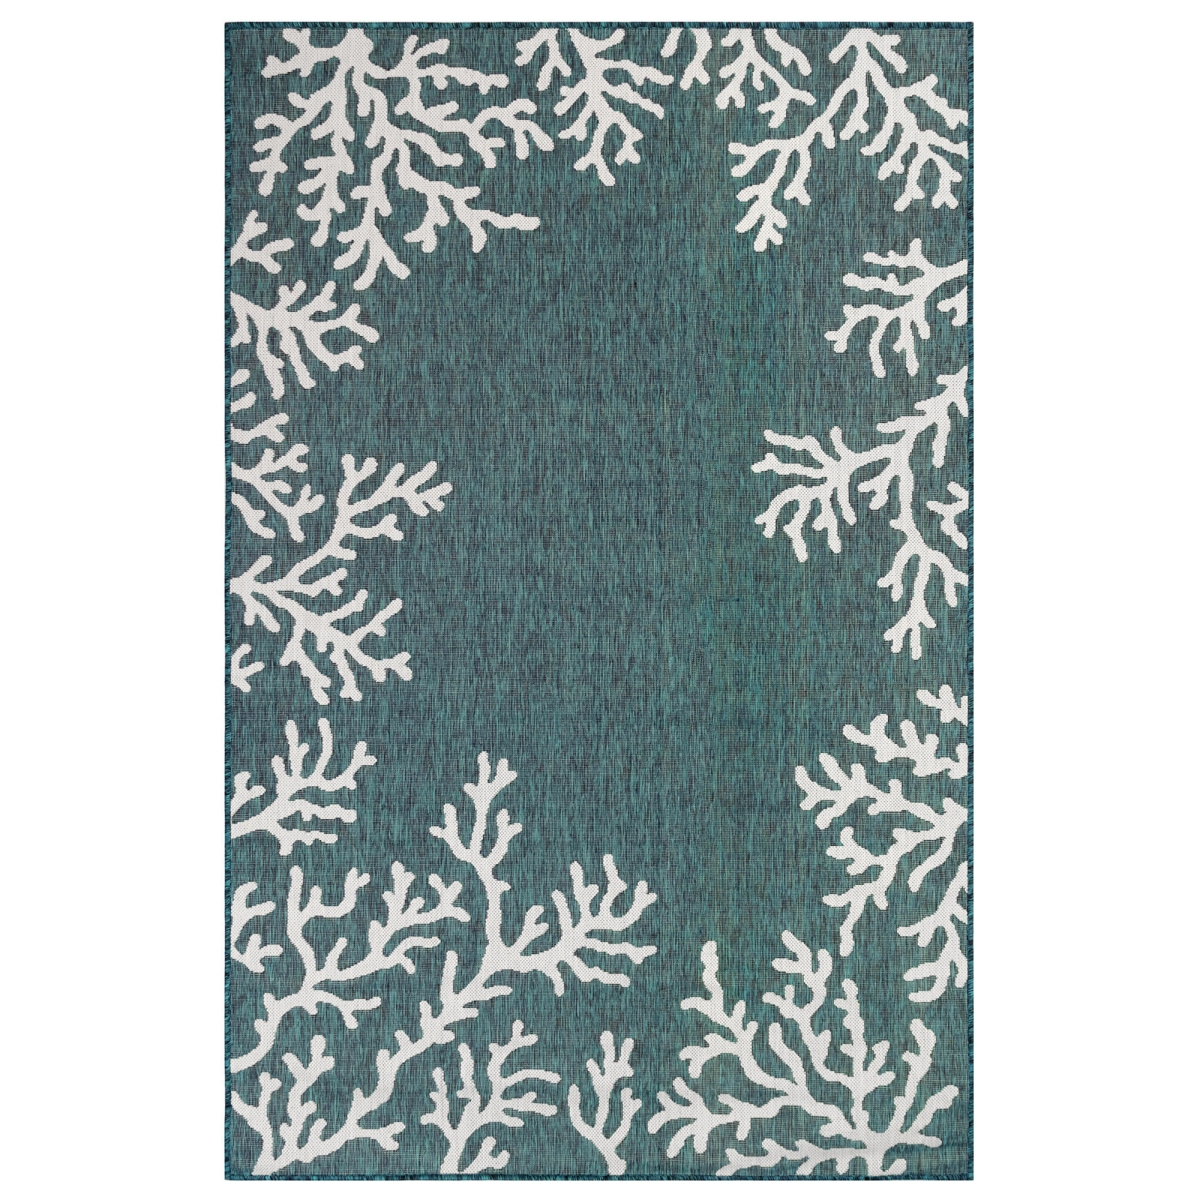 Cre58844894 Liora Manne Carmel Coral Border Indoor & Outdoor Rug, Teal - 4 Ft. 10 In. X 7 Ft. 6 In.